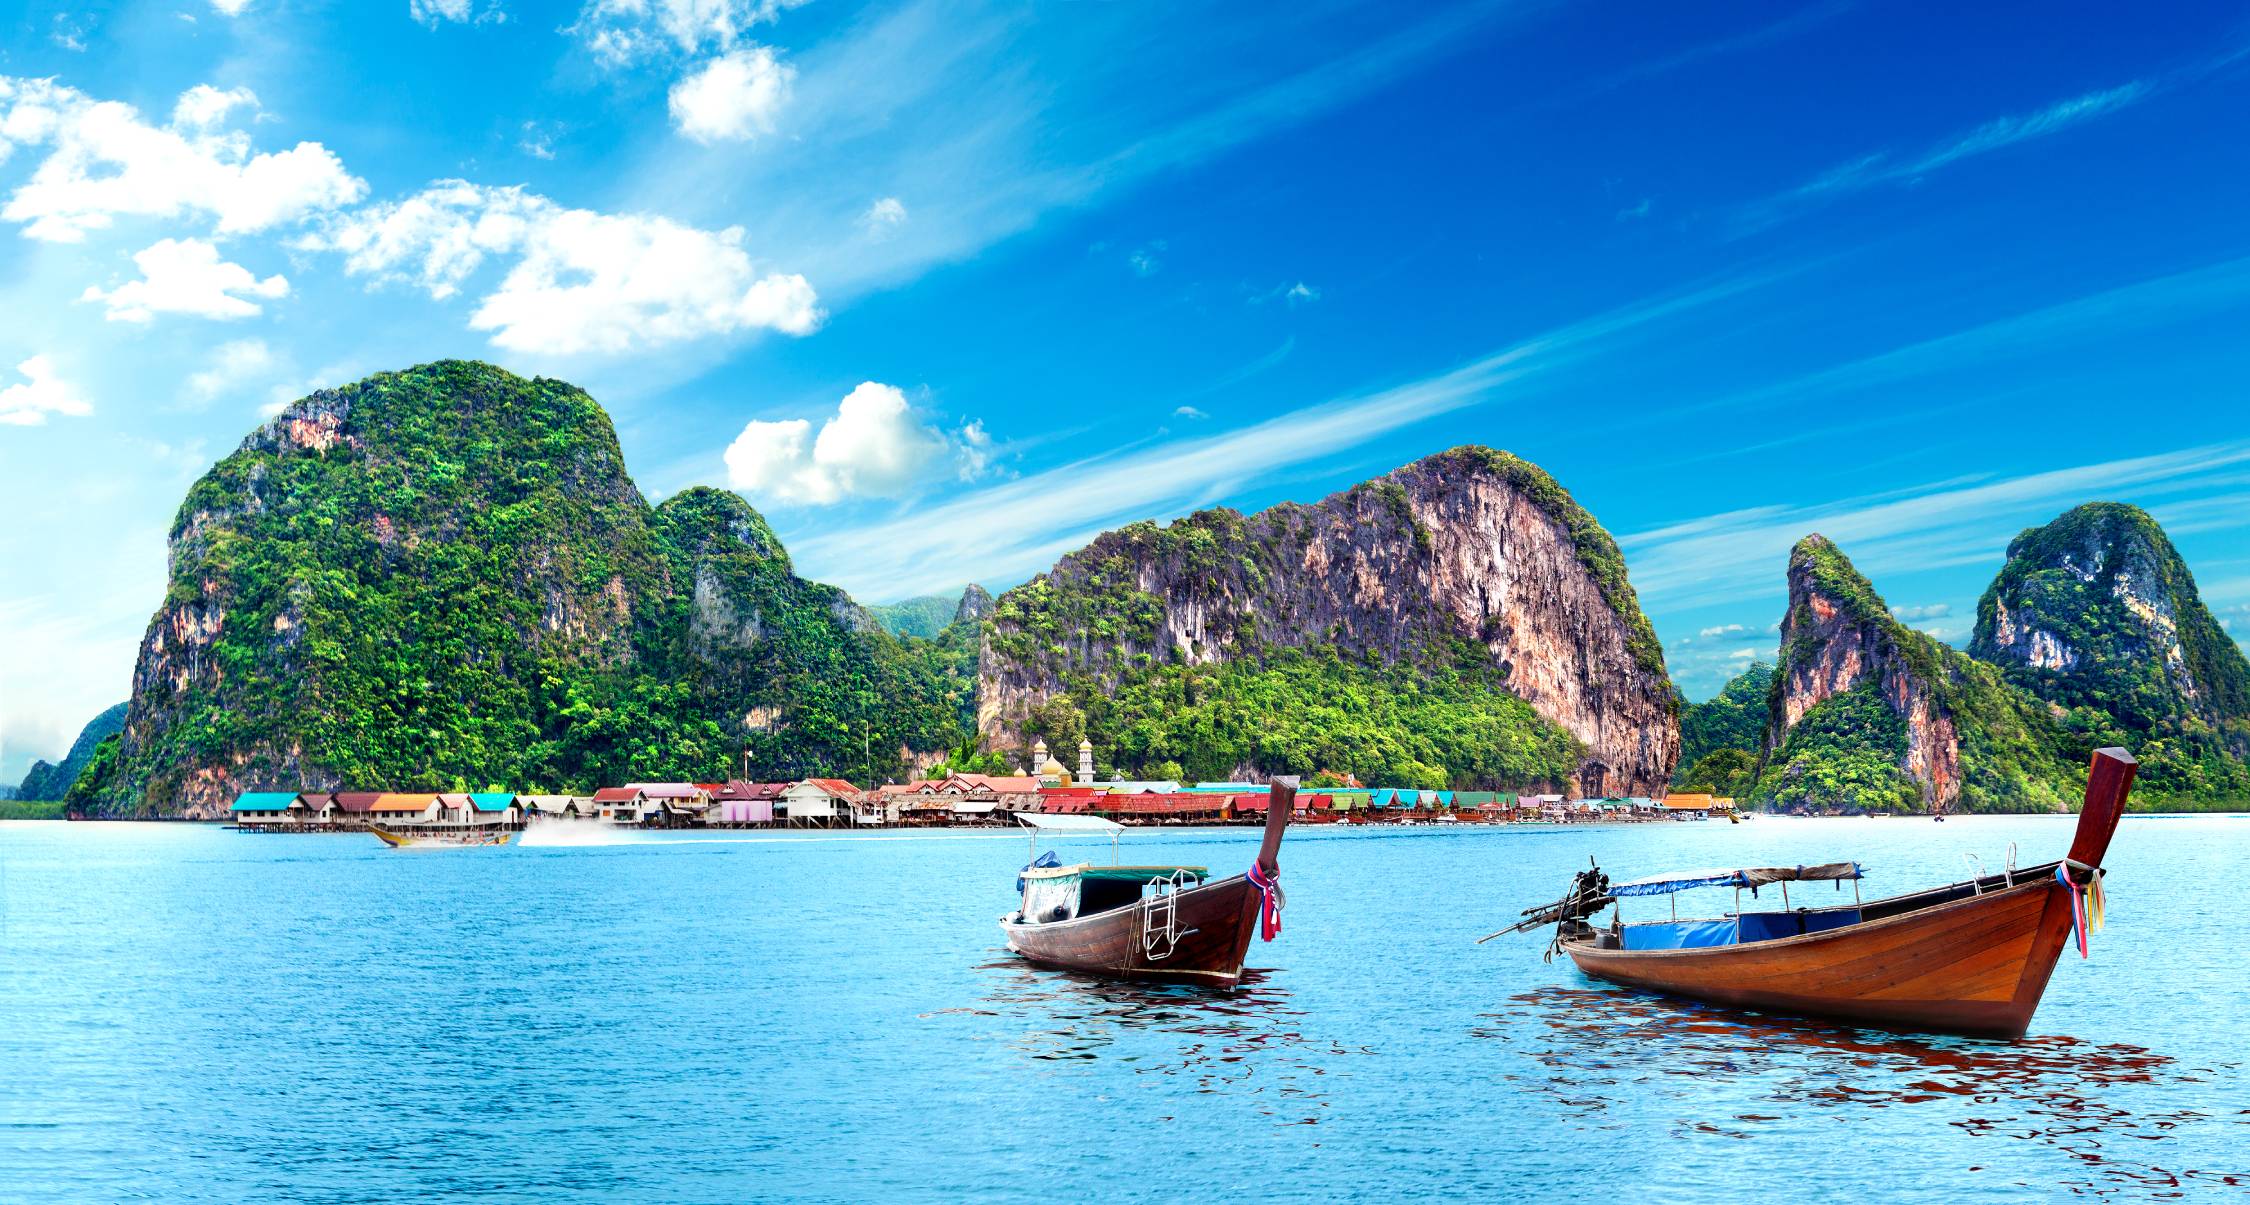 Scenery Thailand sea and island. Adventures and exotic travel concept.